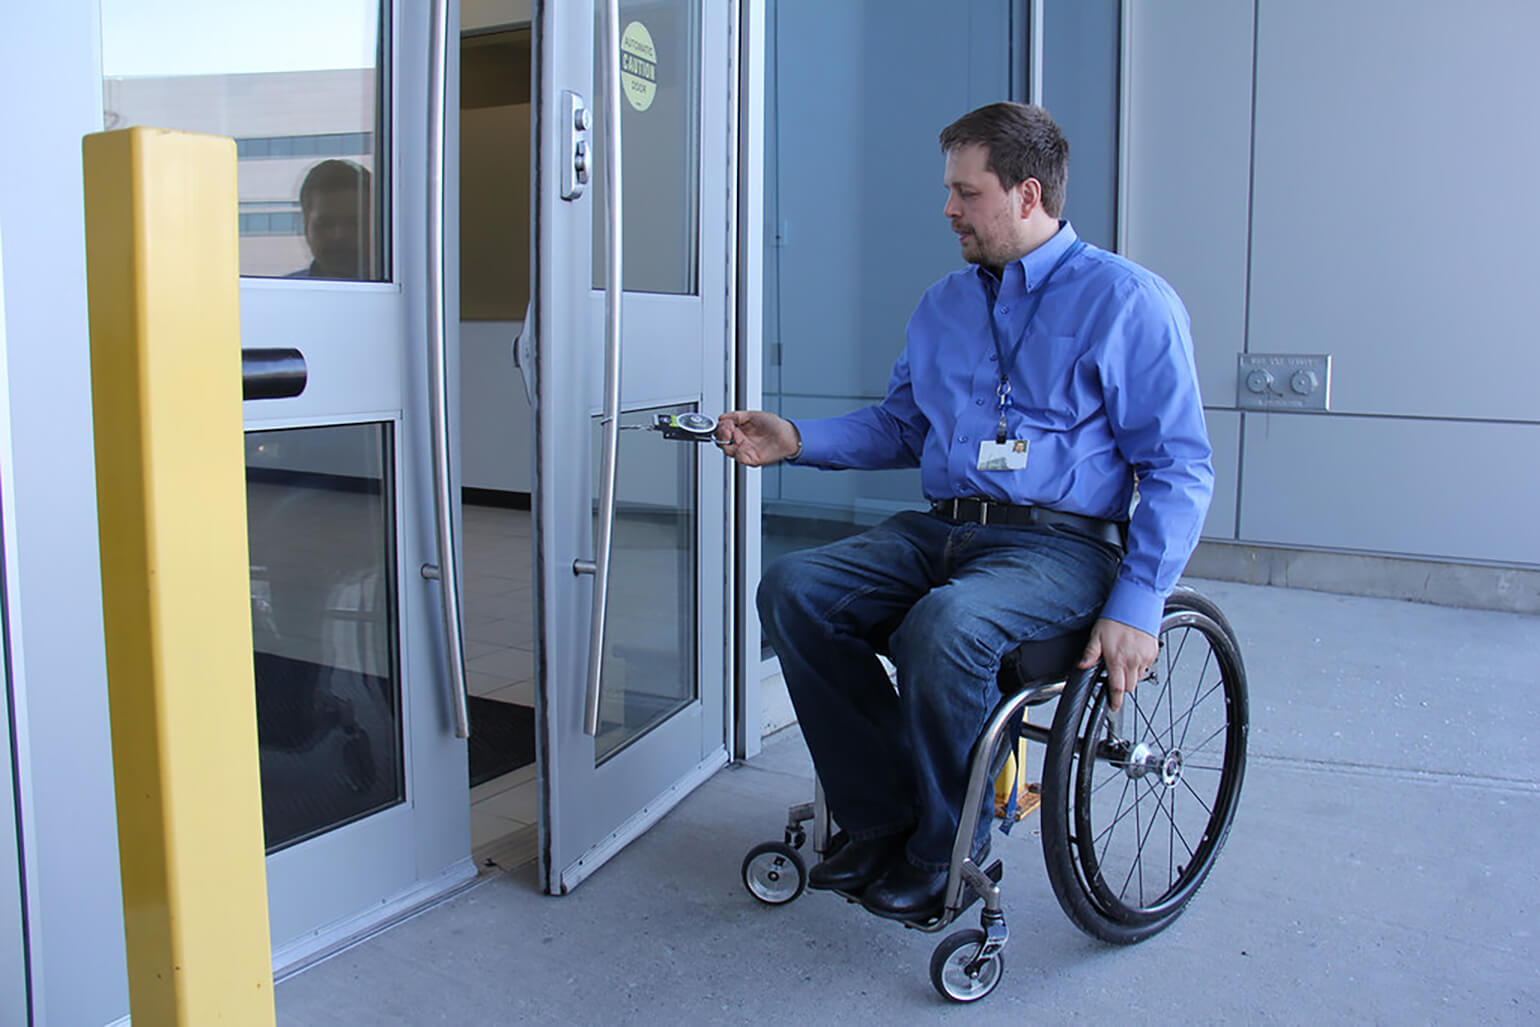 An image of a person using a wheelchair opening a door. They are using a handheld hook to pull a door open, rather than using a door handle or an accessibility button.